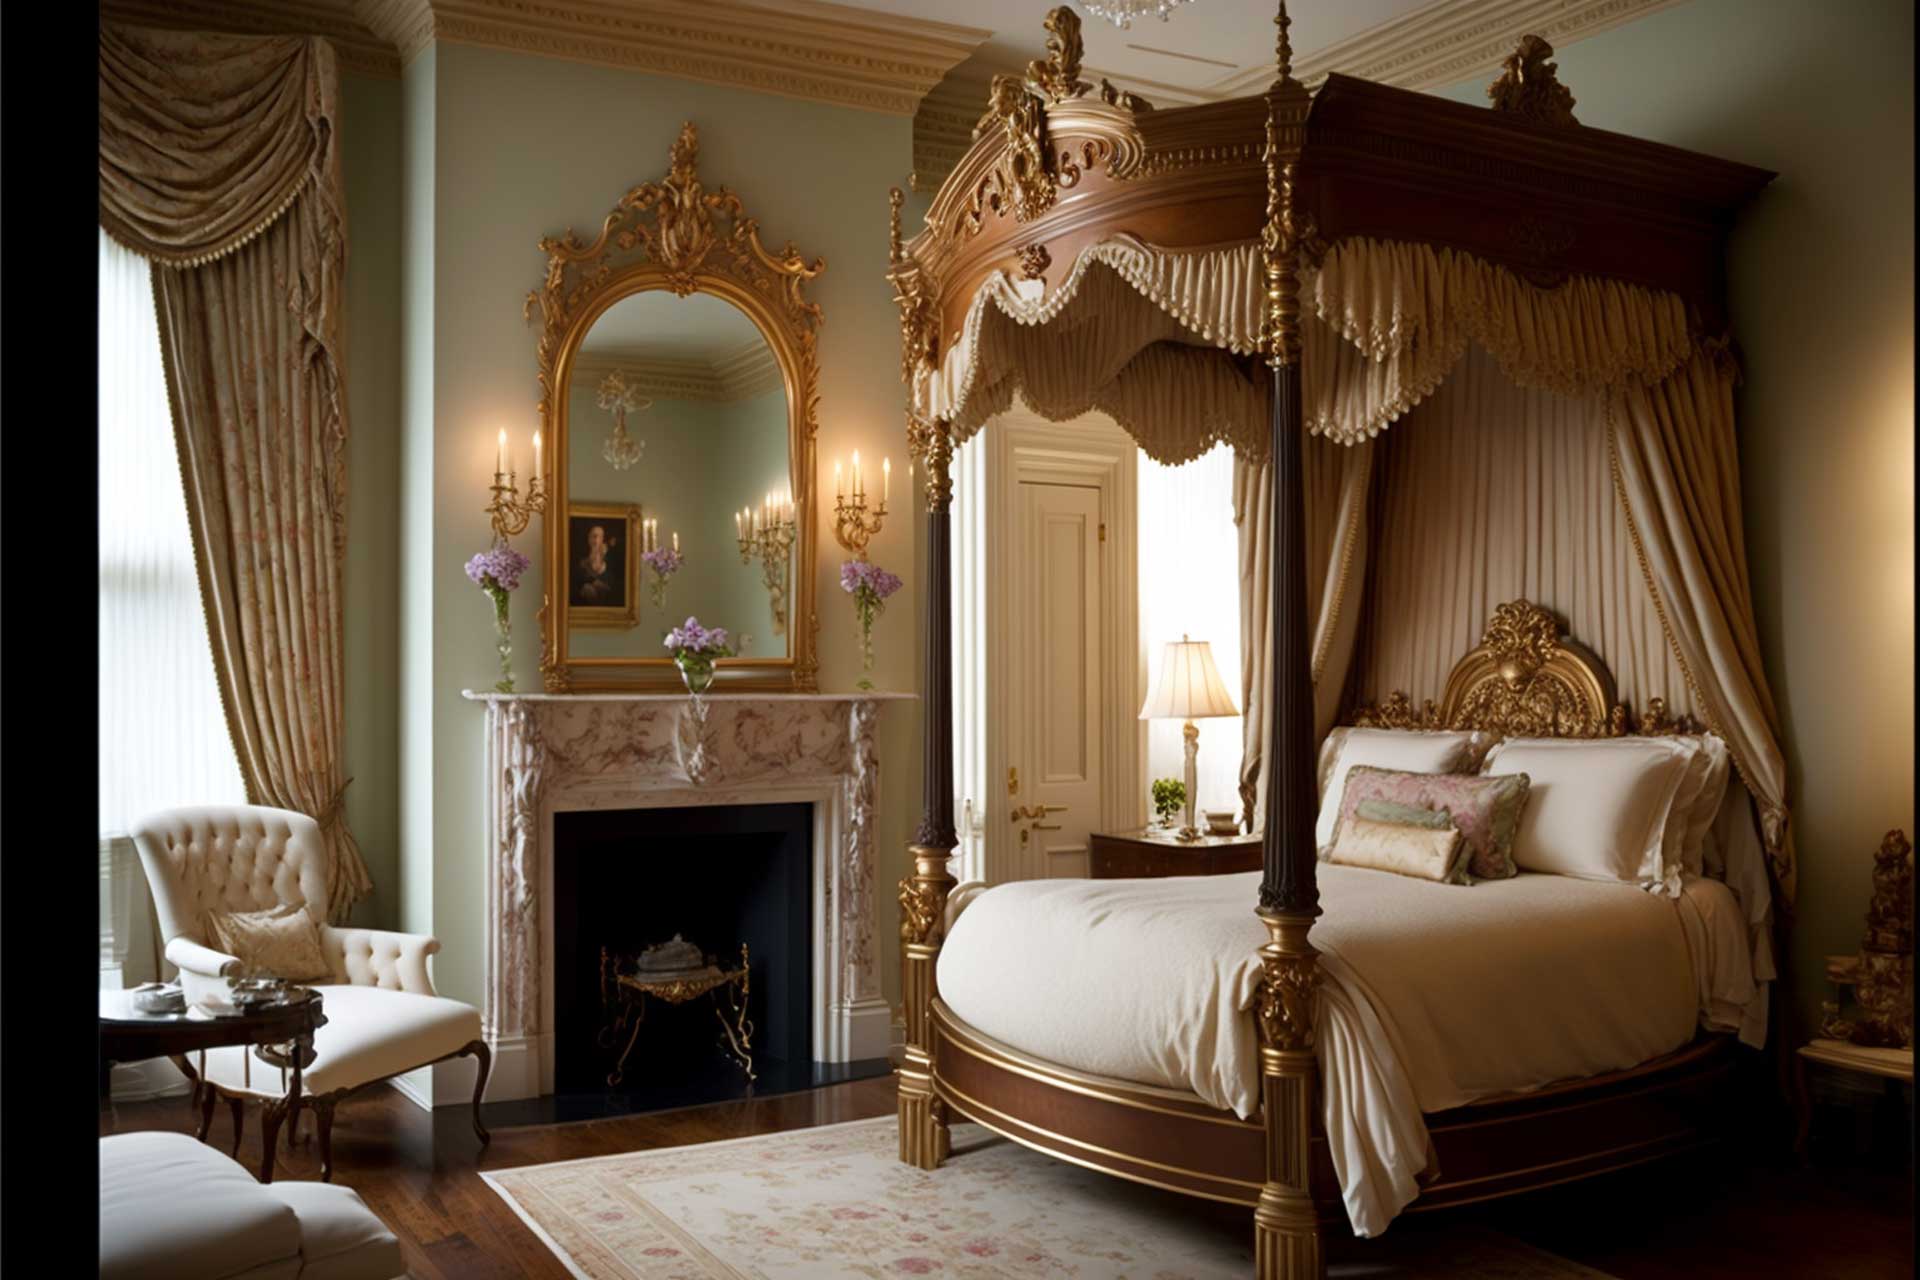 Elegant Antique Inspired Bedroom With Plush Carpets And Fireplace